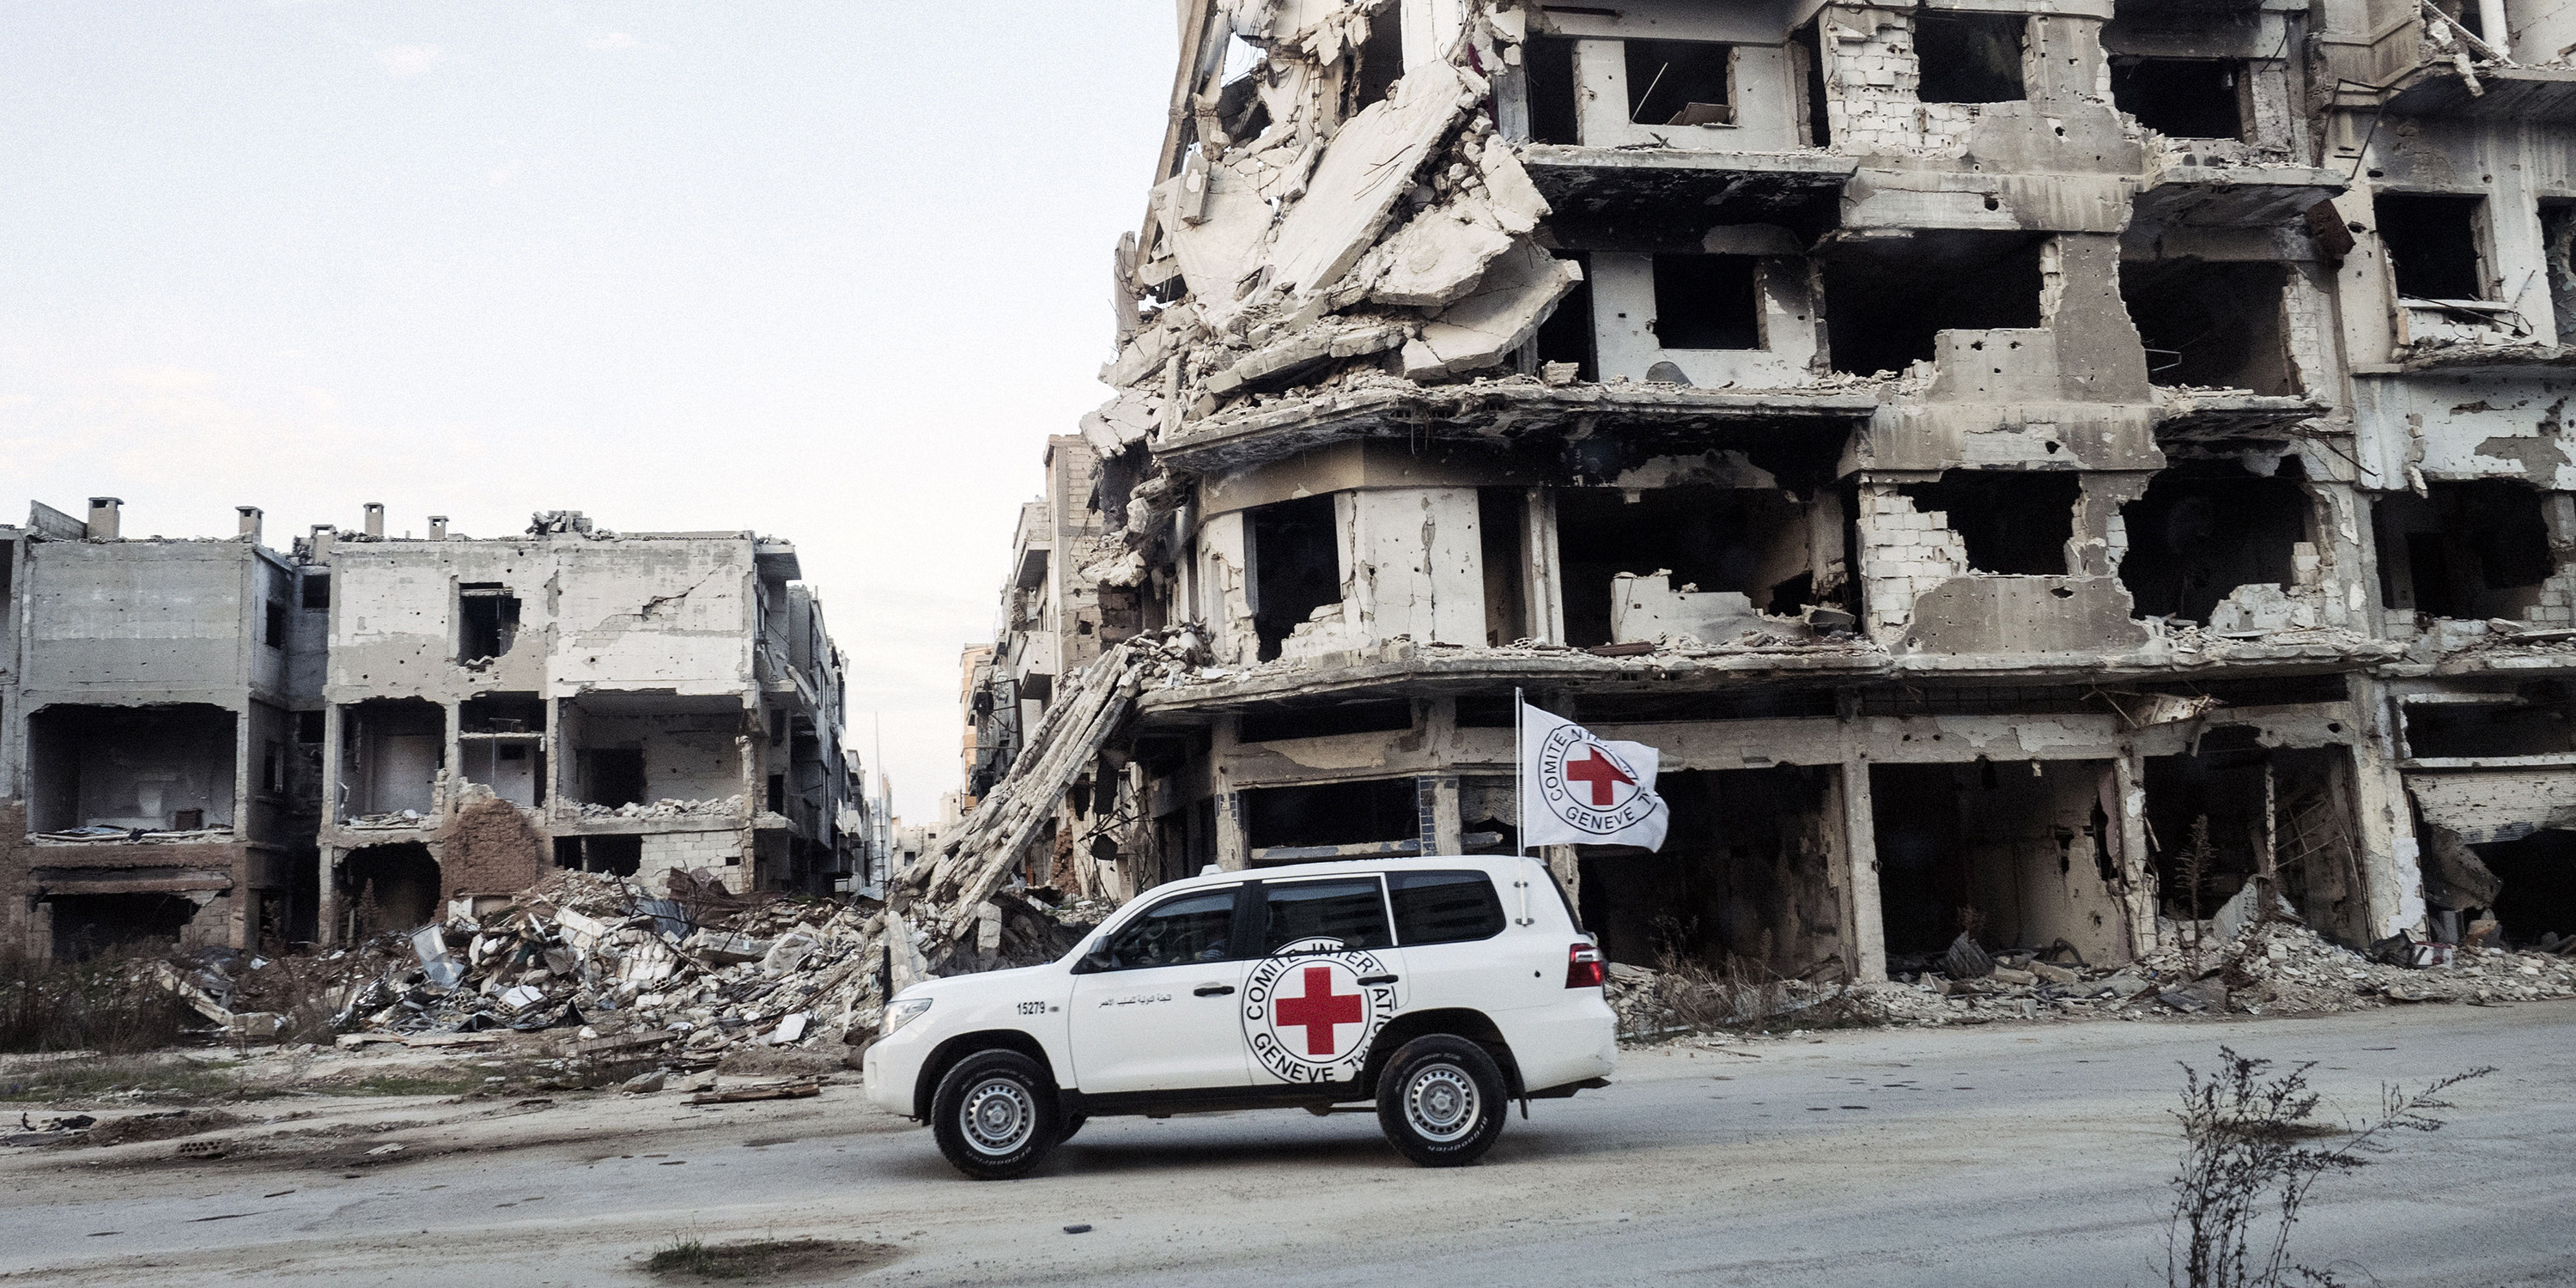 Car of the International Committee of the Red Cross in crisis area